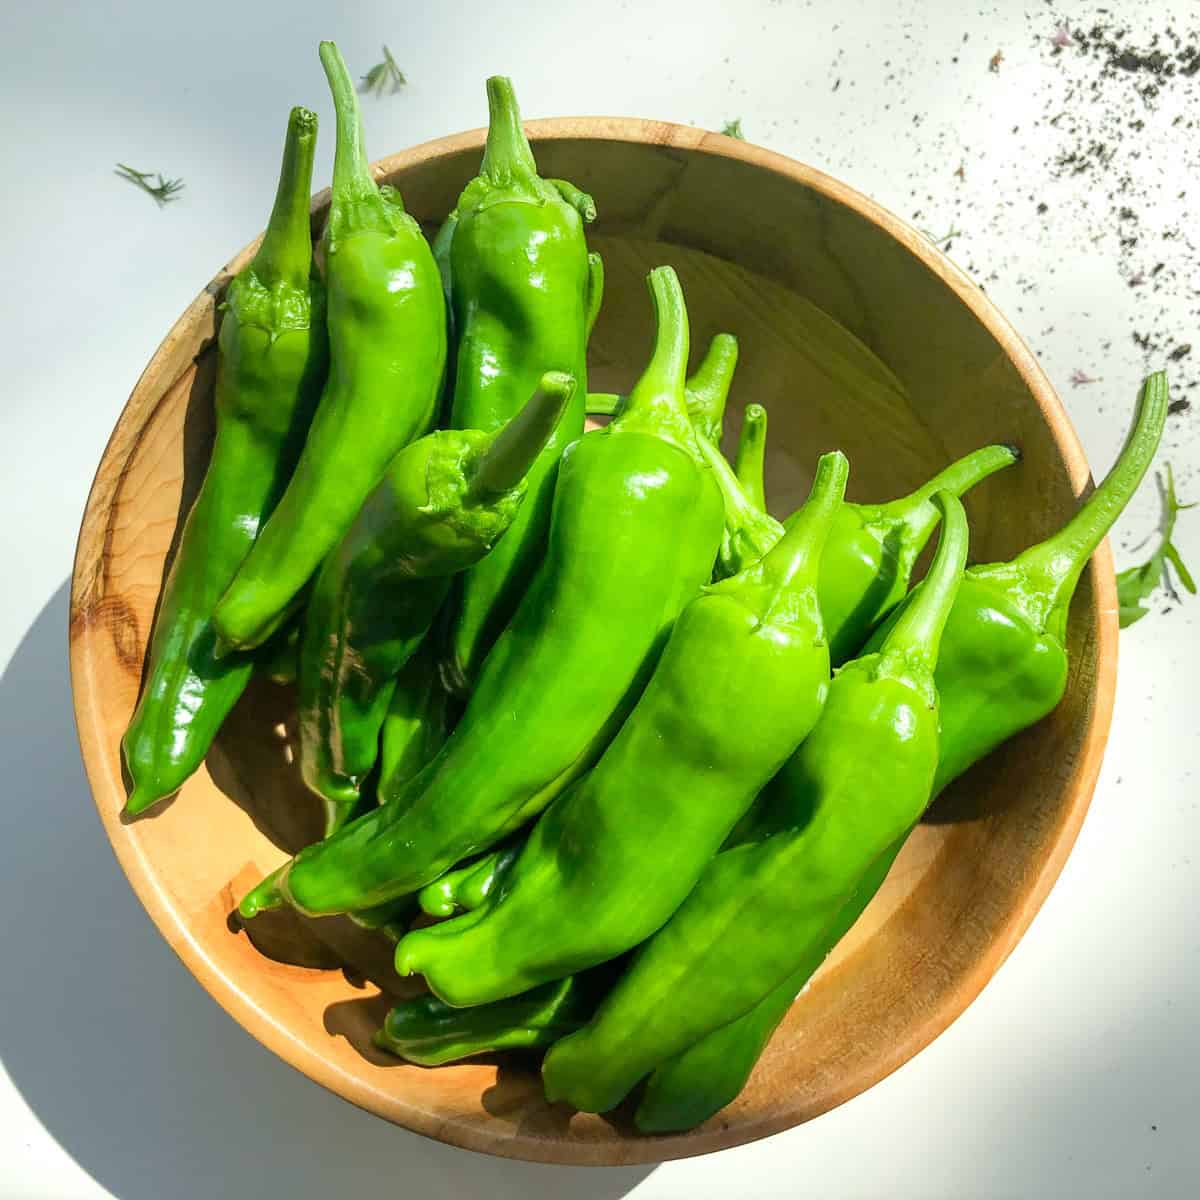 A wooden bowl containing shishito peppers.